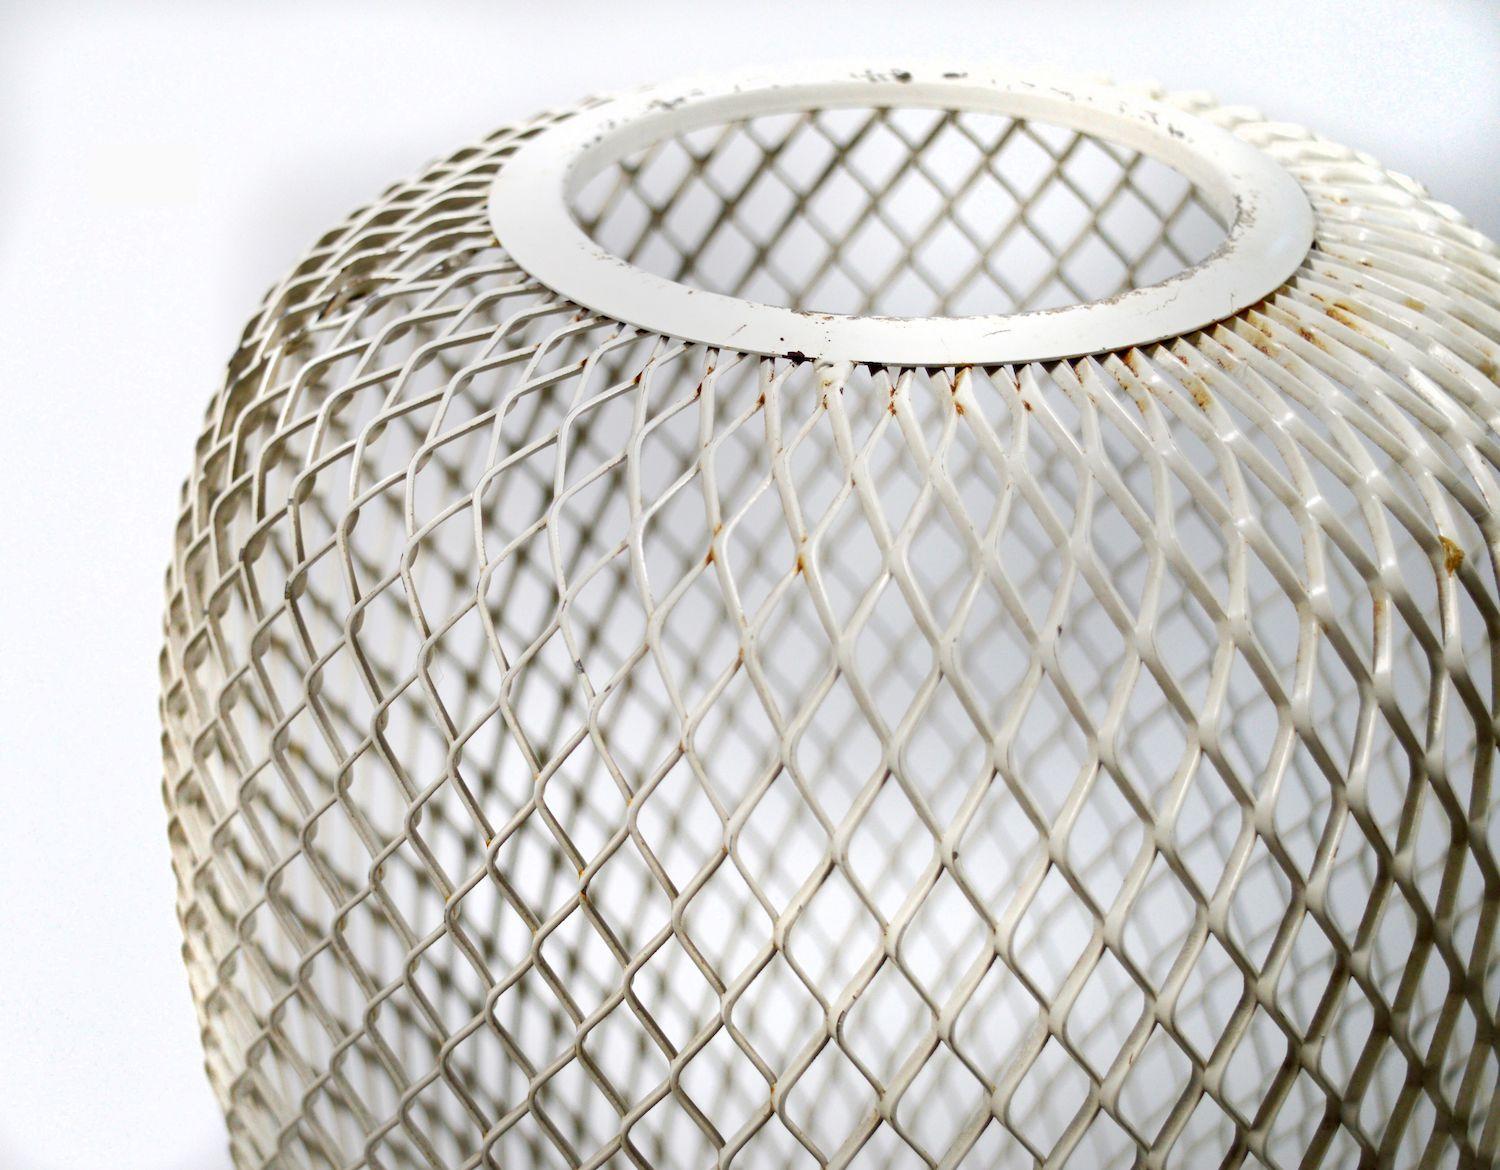 A large French open metal worked mesh vase in cream enamel dating from the 1950s in the style of Mathieu Matégot.
Of classical plum shape but modernist in design the vase rests on a raised circular plinth creating a harmonious balance between form,